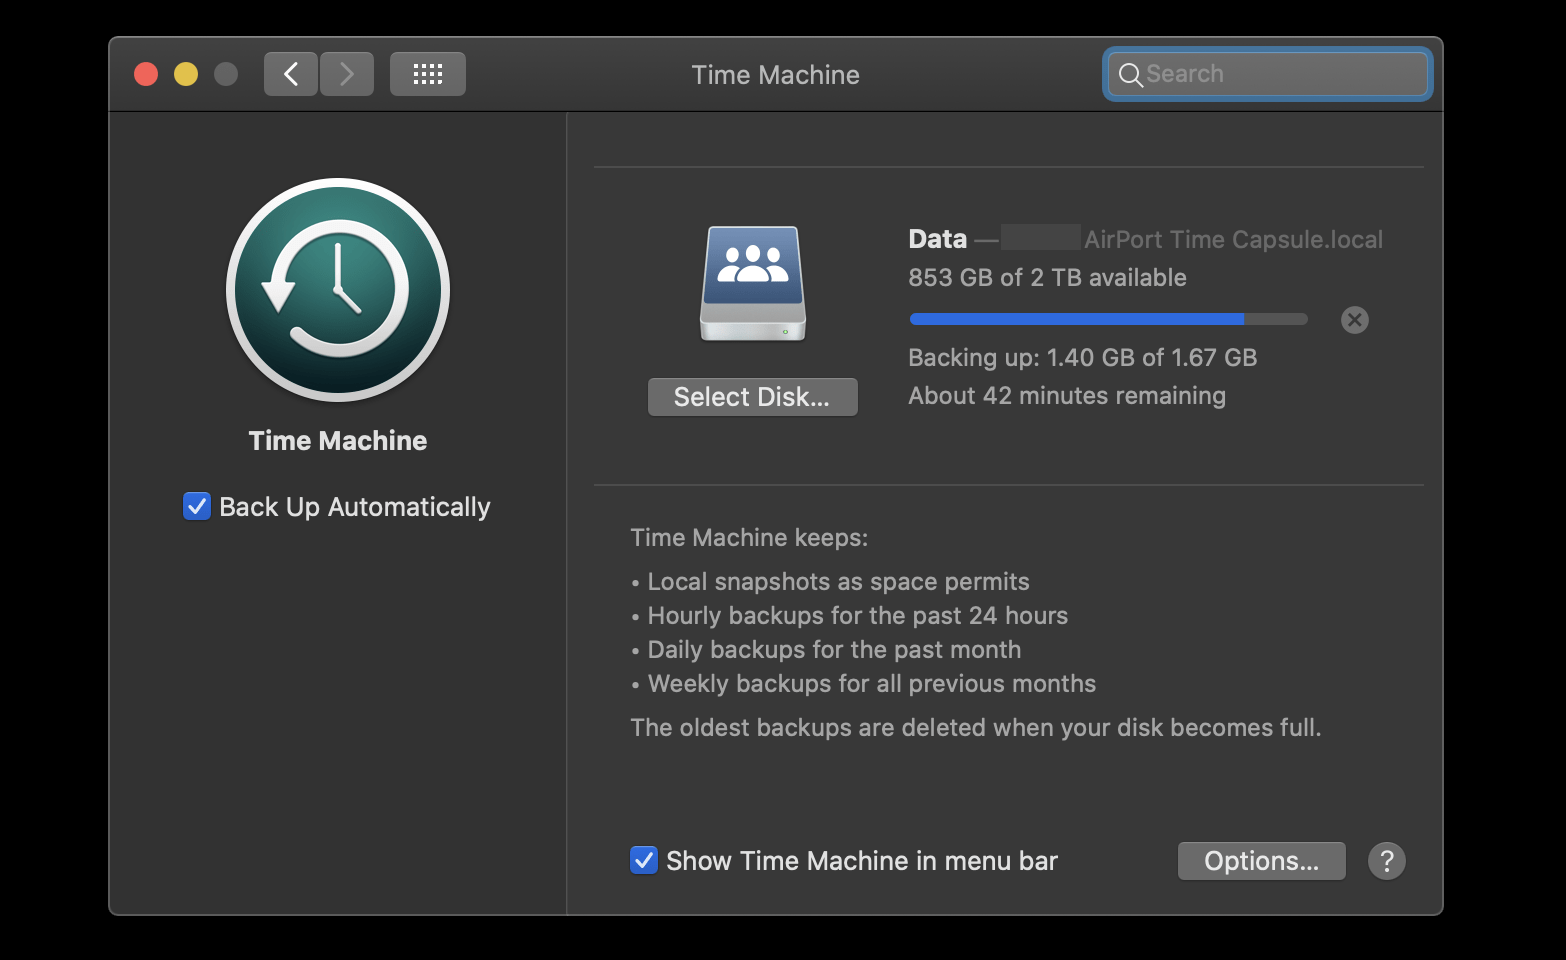 How to backup Mac: The ultimate guide 2022